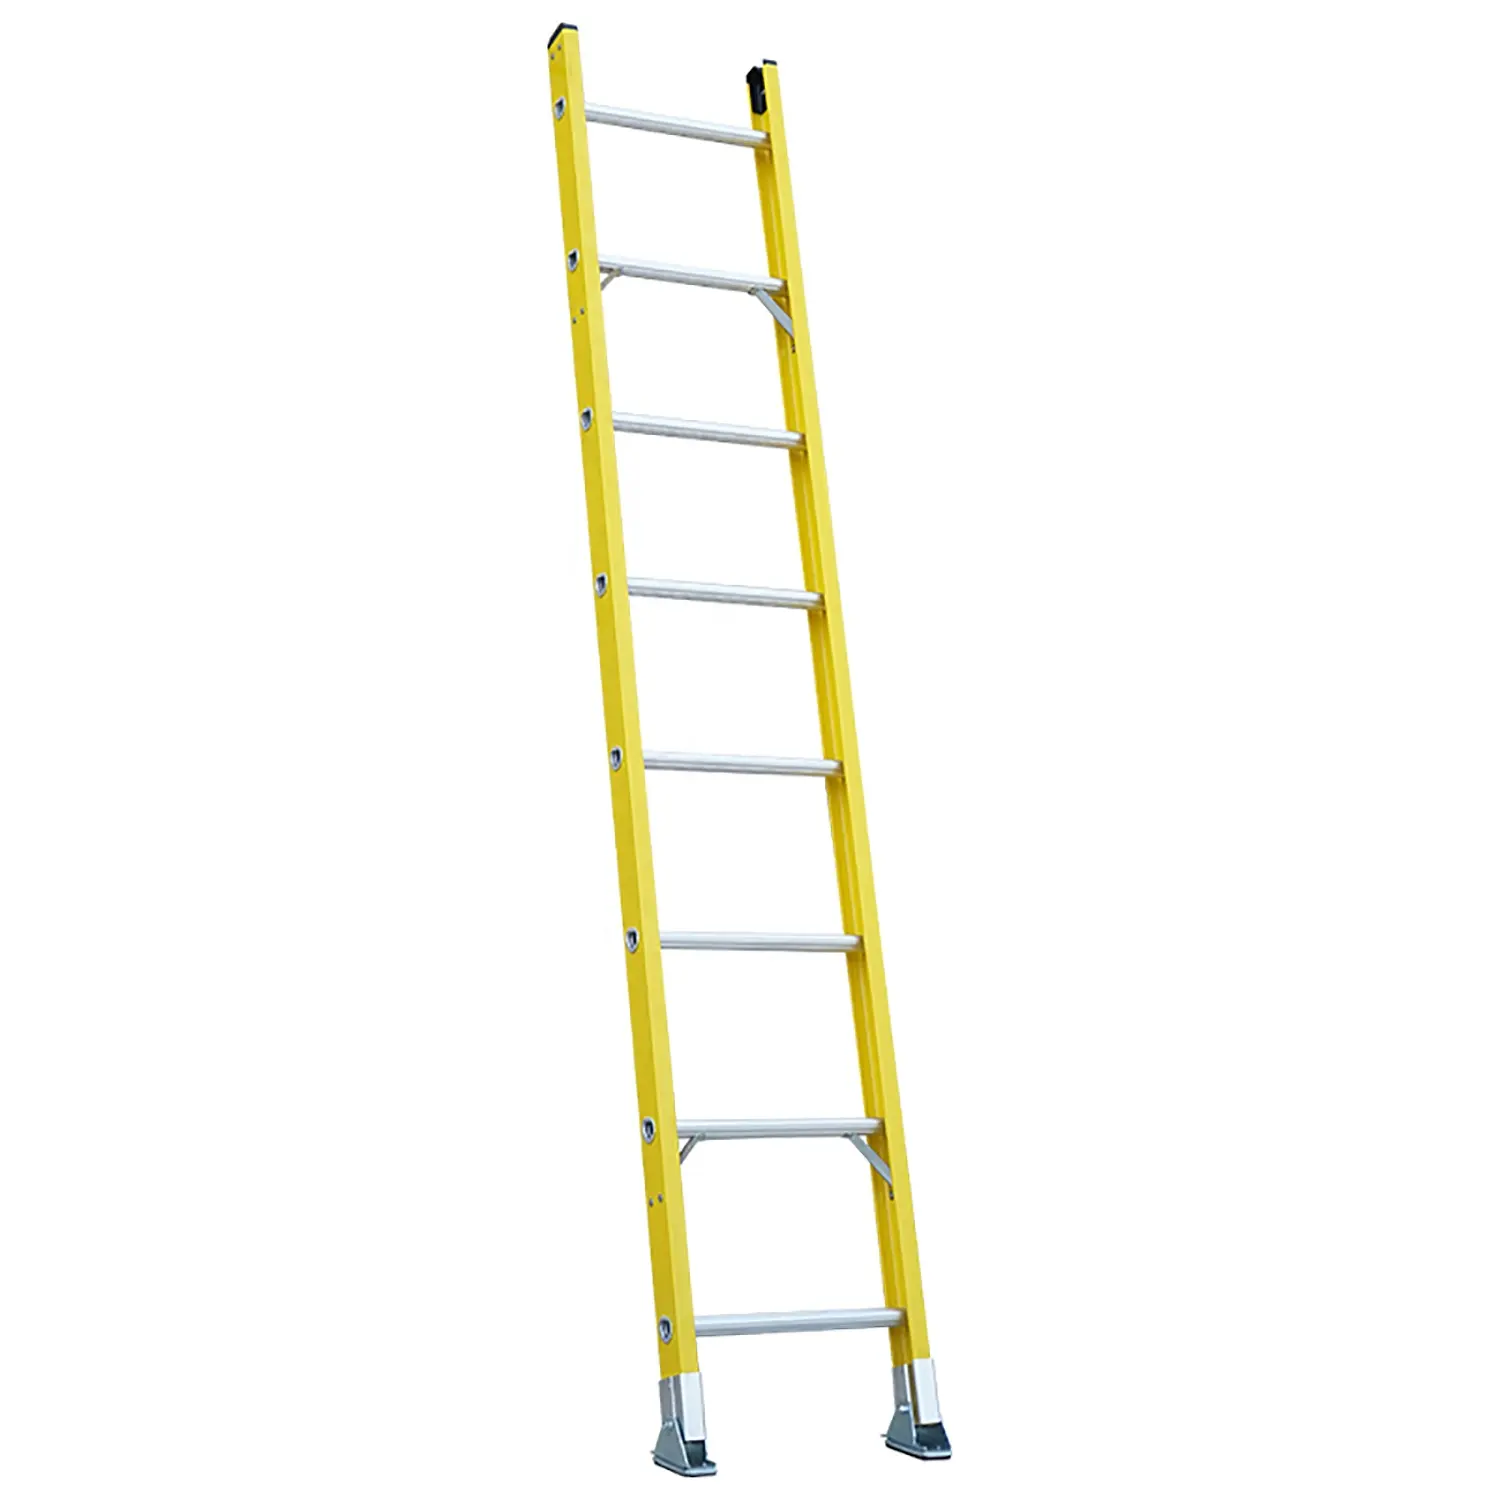 South America hot sale 8 step D type rung fiberglass single straight step ladder for industrial power work or home use